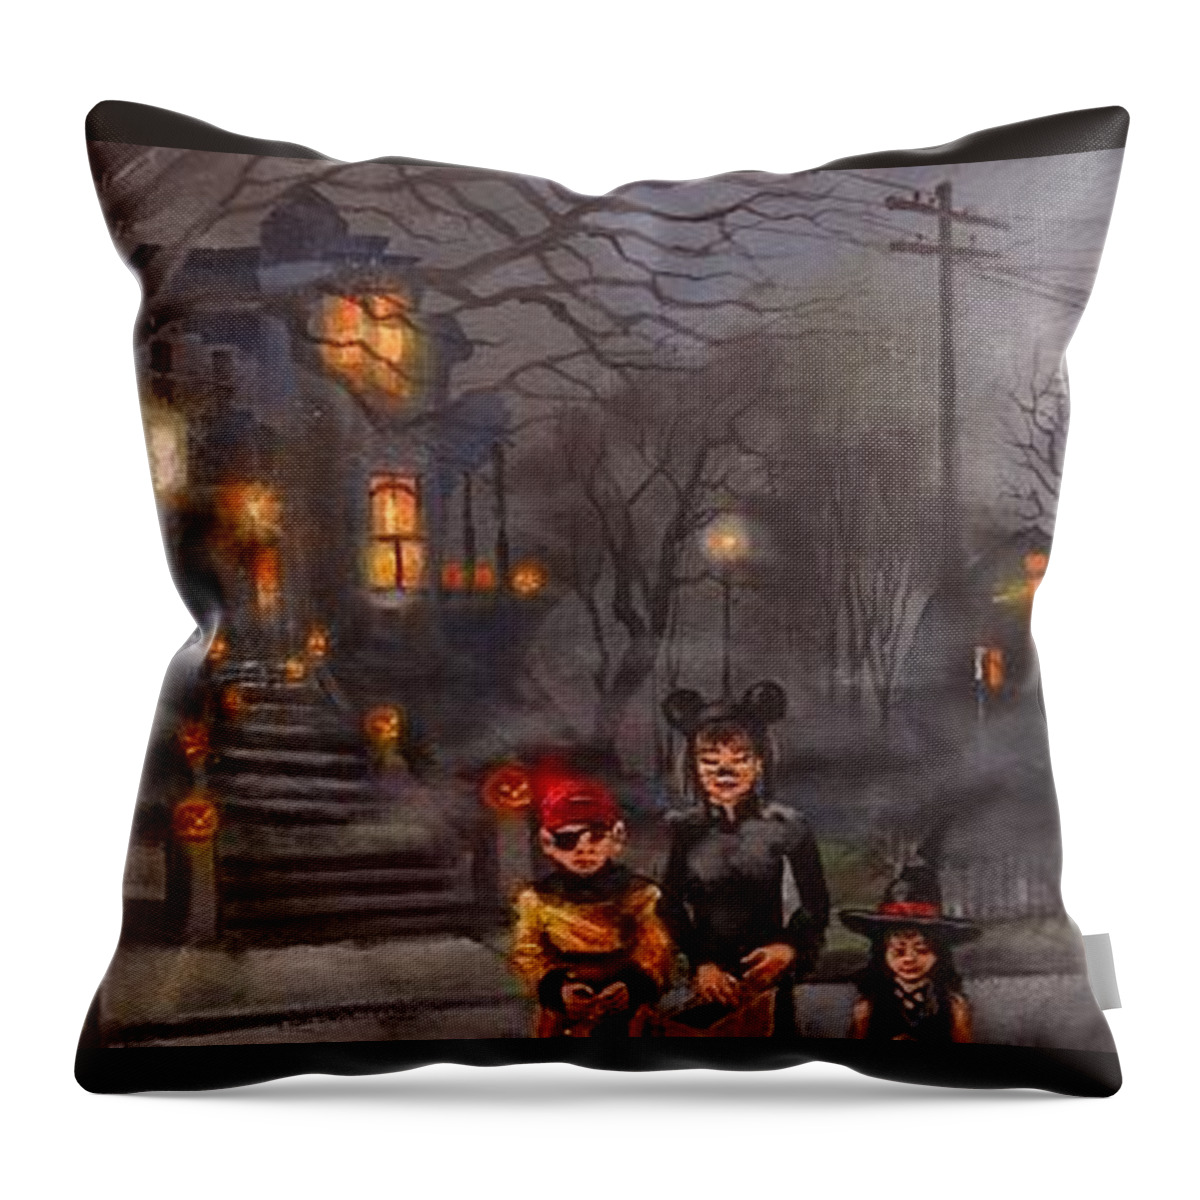 Full Moon Throw Pillow featuring the painting Halloween Trick or Treat by Tom Shropshire